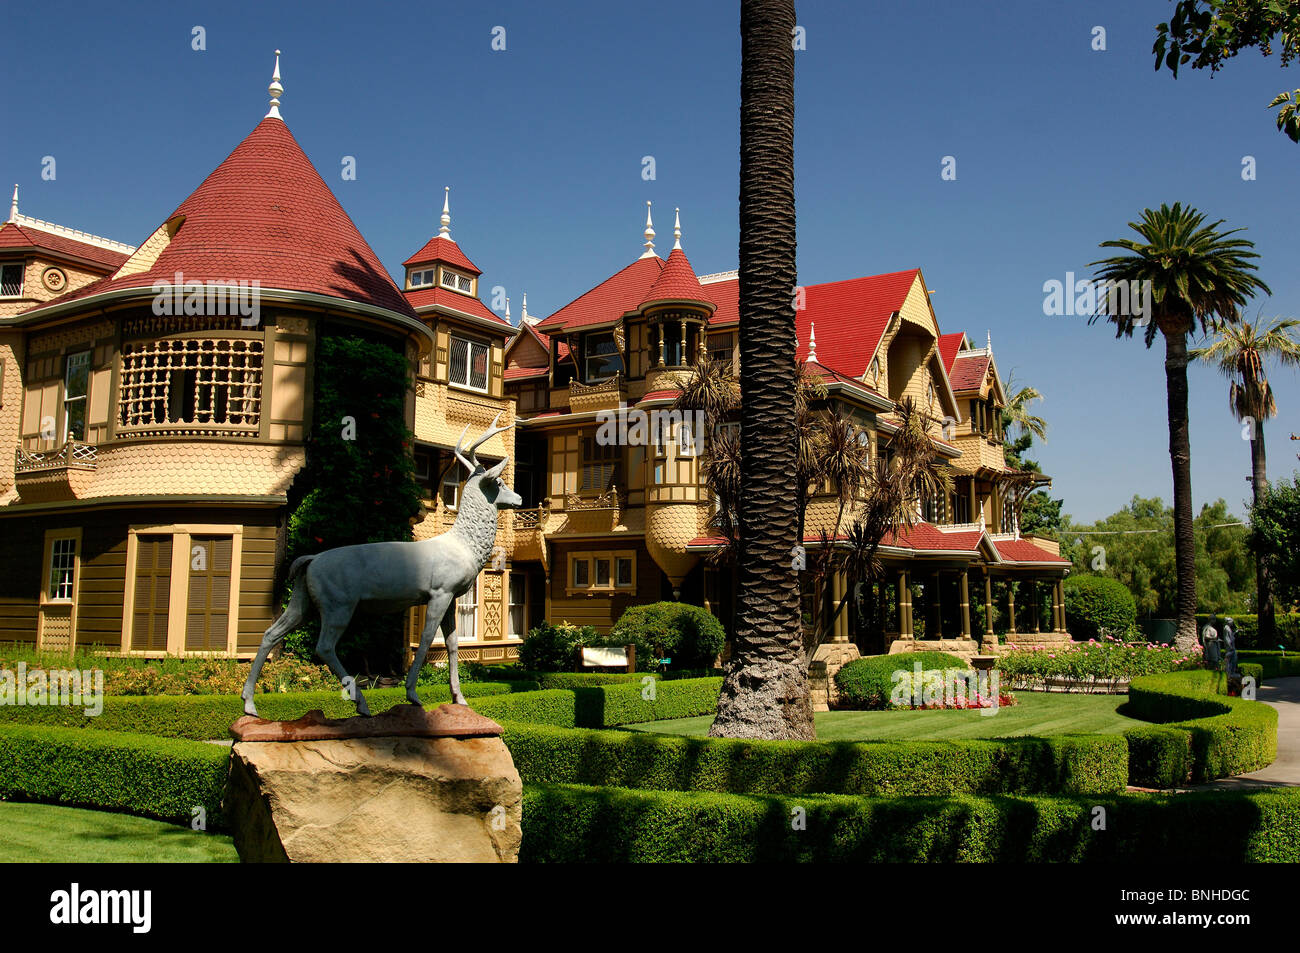 Usa San Jose California Winchester Mystery House Mansion Villa Palm Trees Deer Sculpture Garden Park United States of America Stock Photo